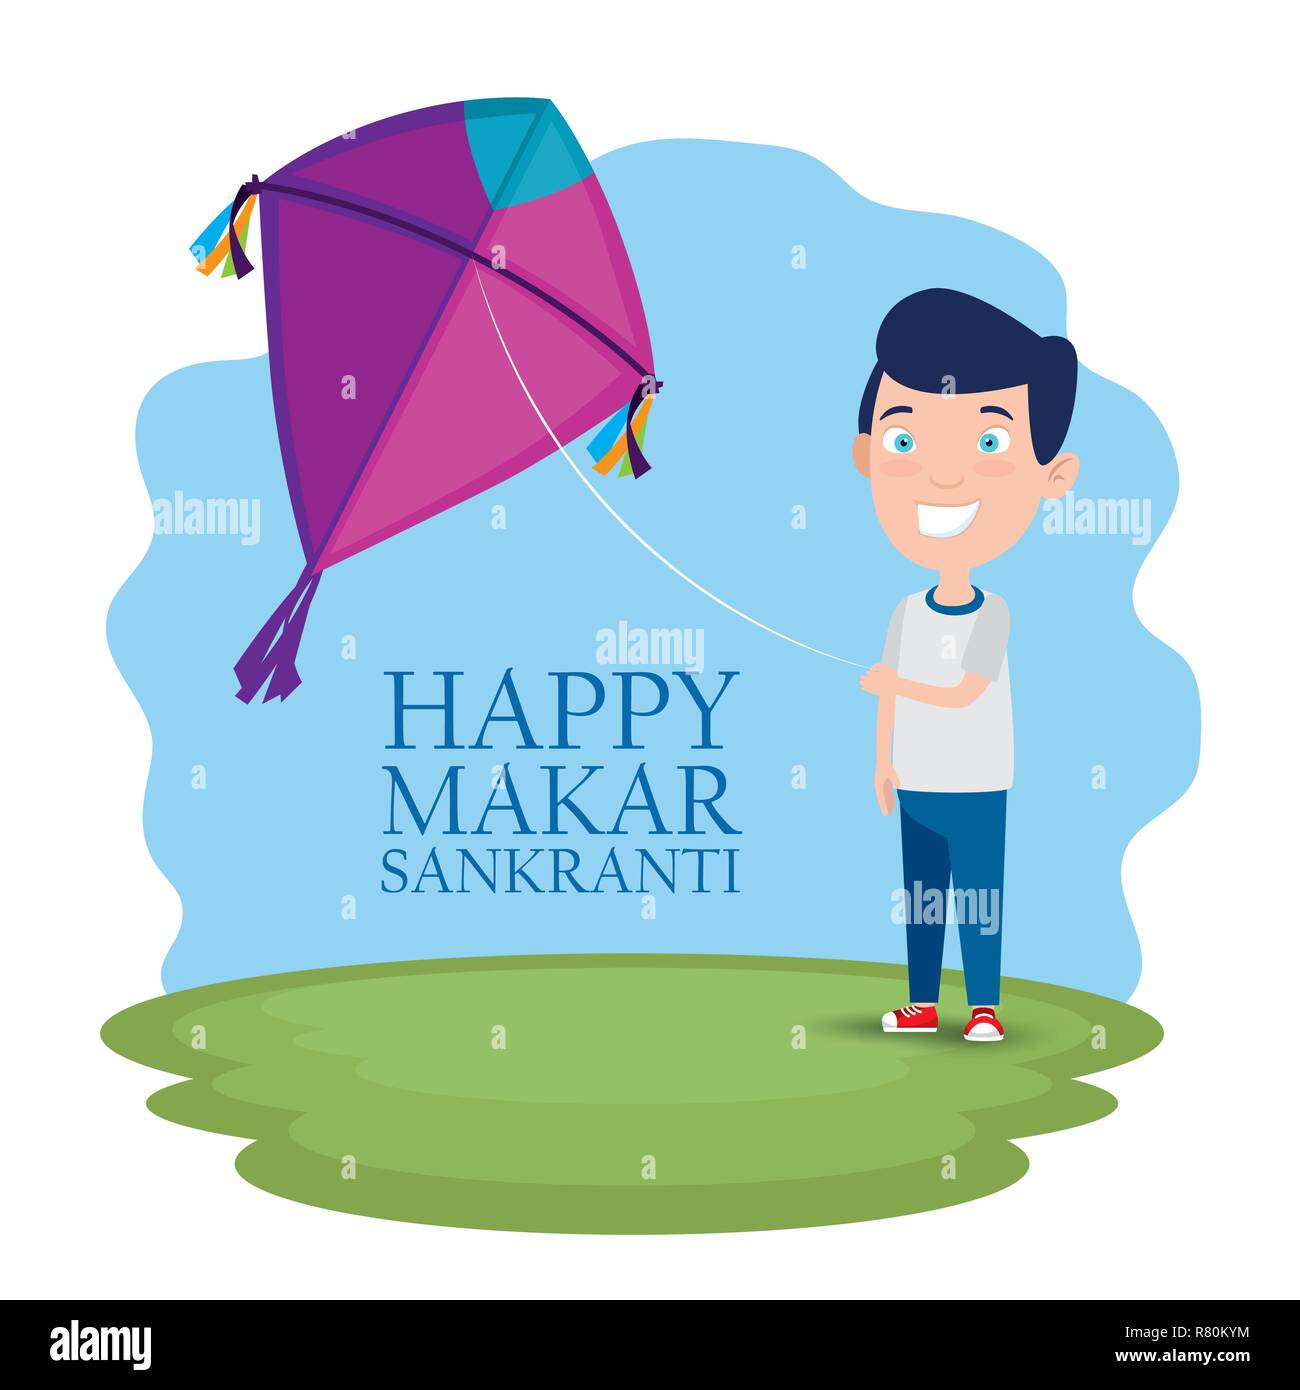 Makar sankranti festival Cut Out Stock Images & Pictures - Page 2 - Alamy